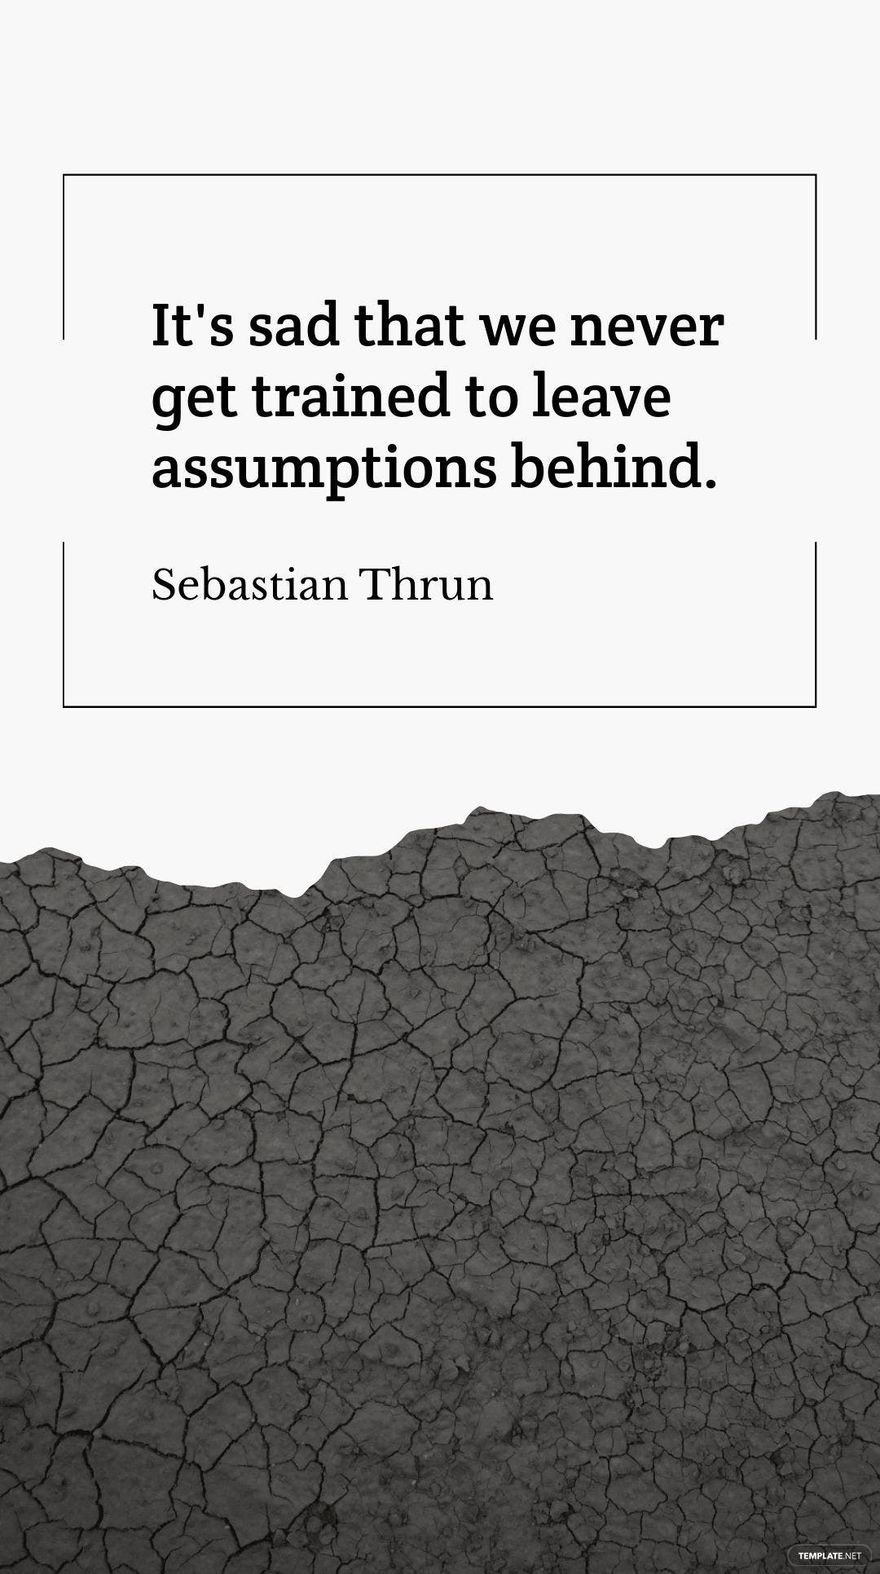 Sebastian Thrun - It's sad that we never get trained to leave assumptions behind.